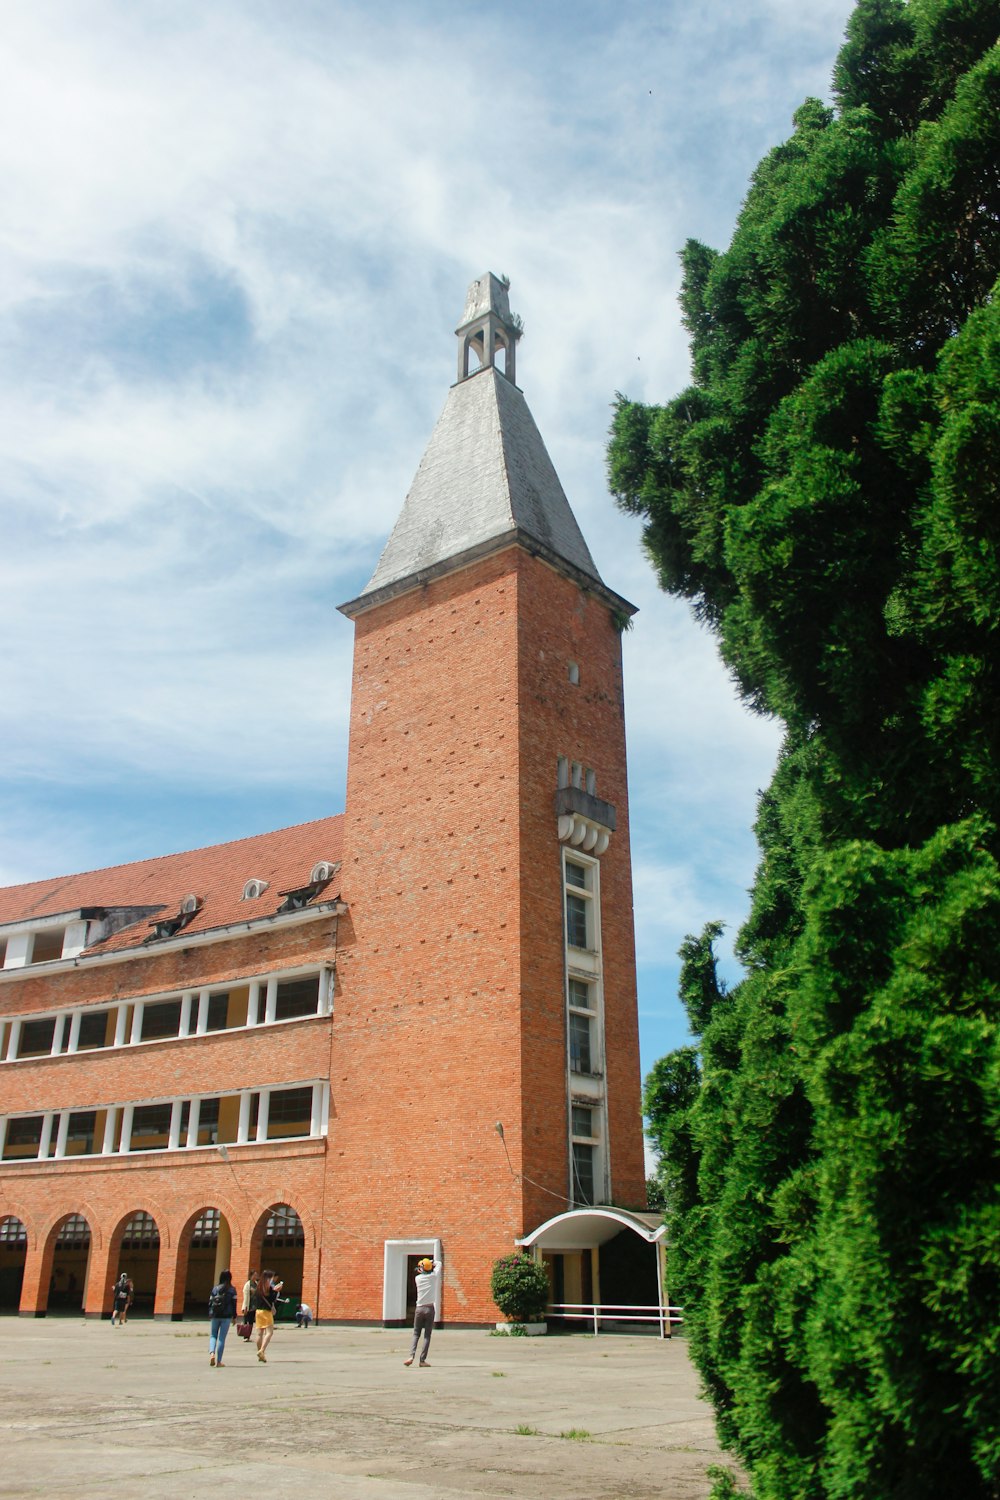 a tall brick building with a clock tower